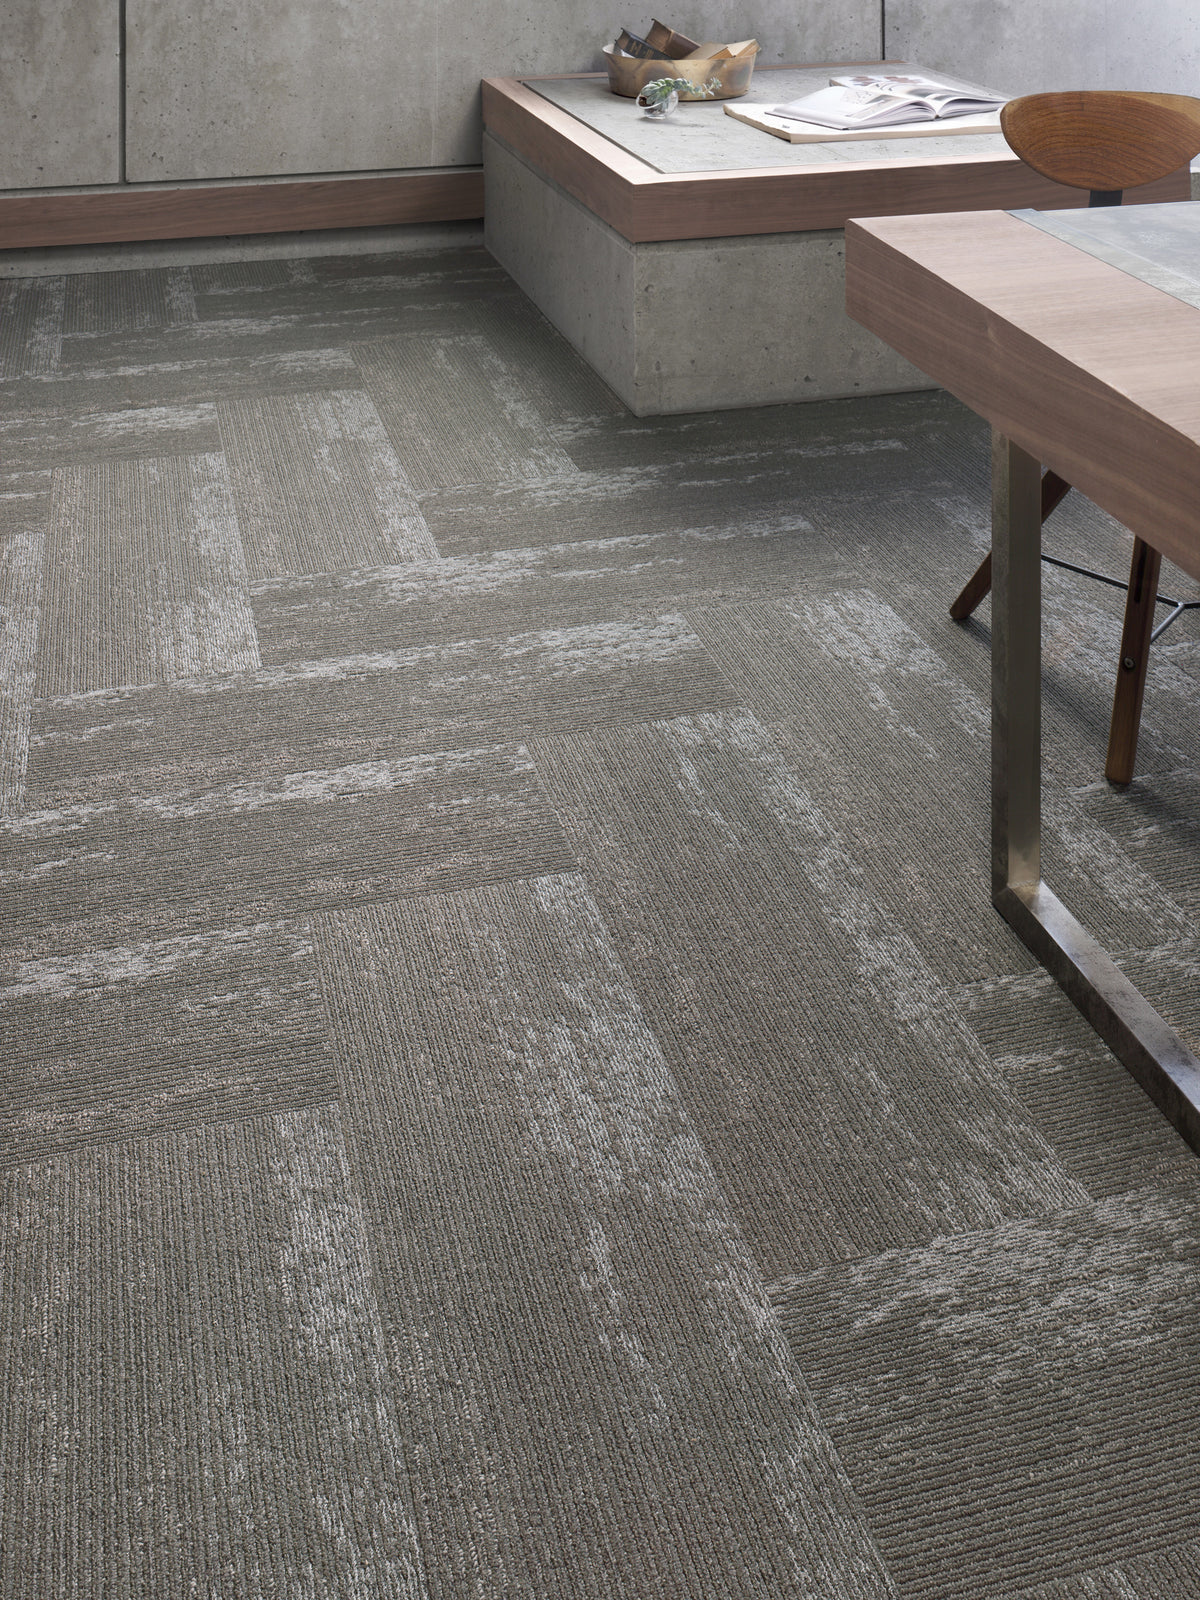 Mohawk Group - Iconic Earth - Metalmorphic - Commercial Carpet Tile - Canyon Clay Metallic